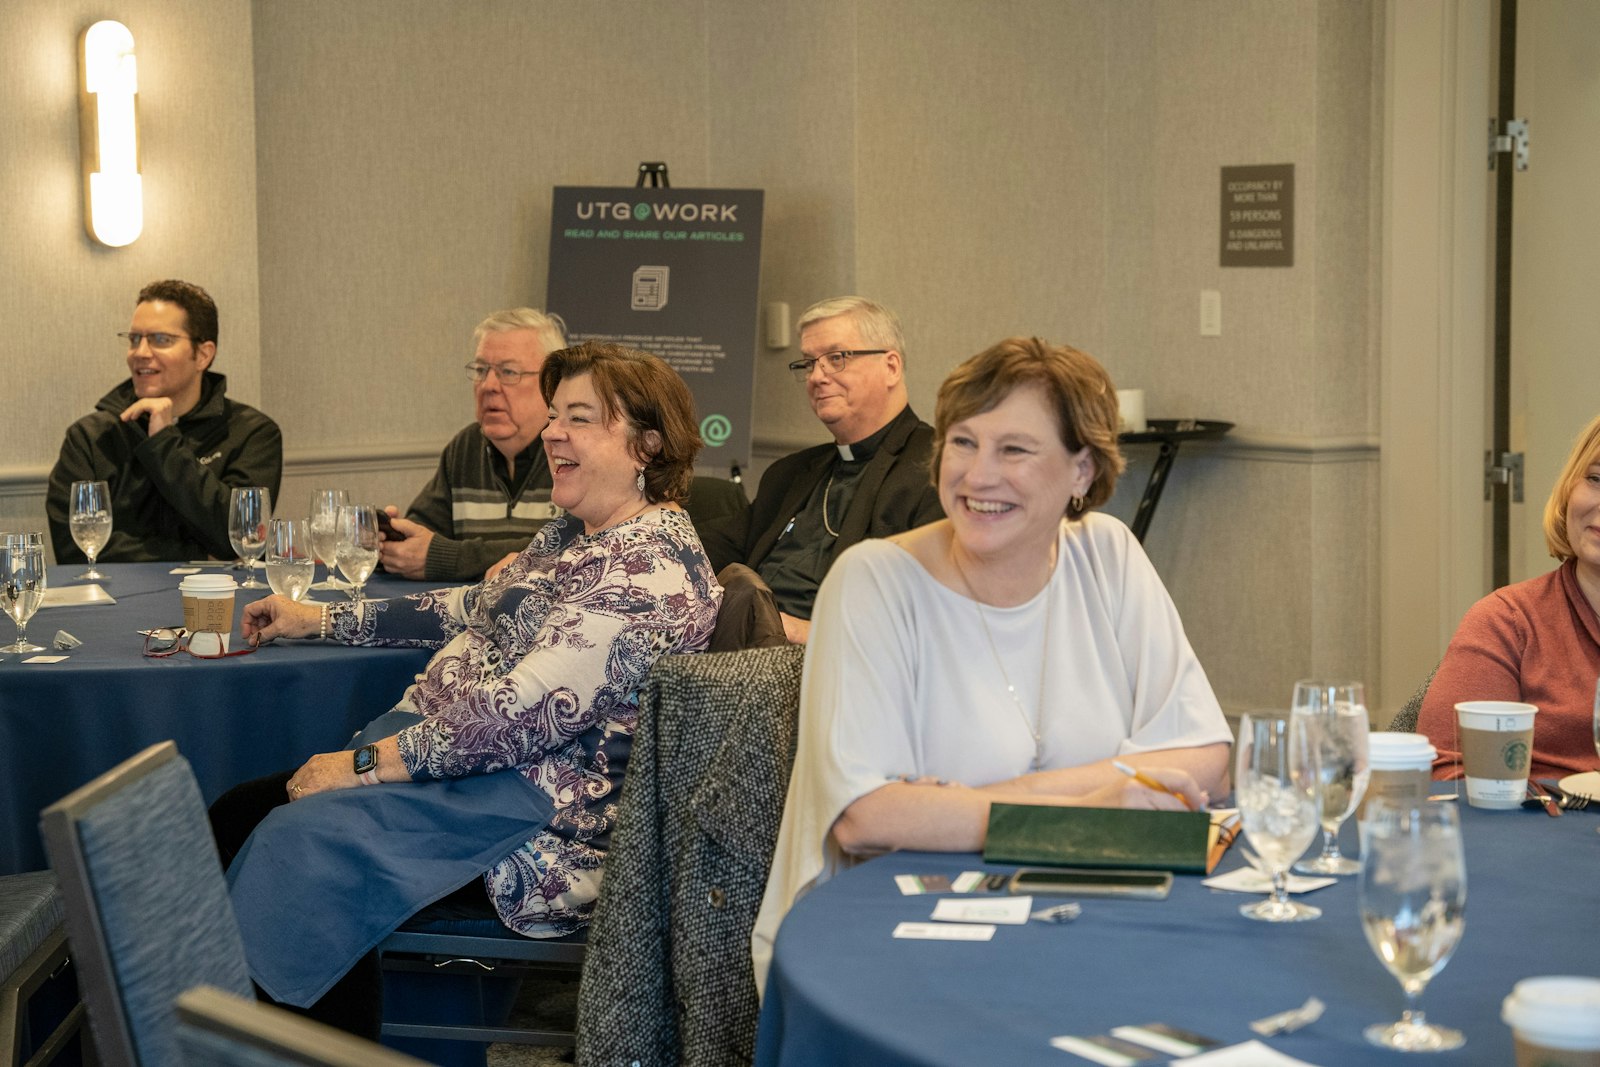 The roundtable, sponsored by the Catholic Foundation of Michigan, was preceded by Mass at St. Aloysius Parish in downtown Detroit, followed by the luncheon talk and discussion led by Dr. Grady at the next-door Westin Book Cadillac hotel.